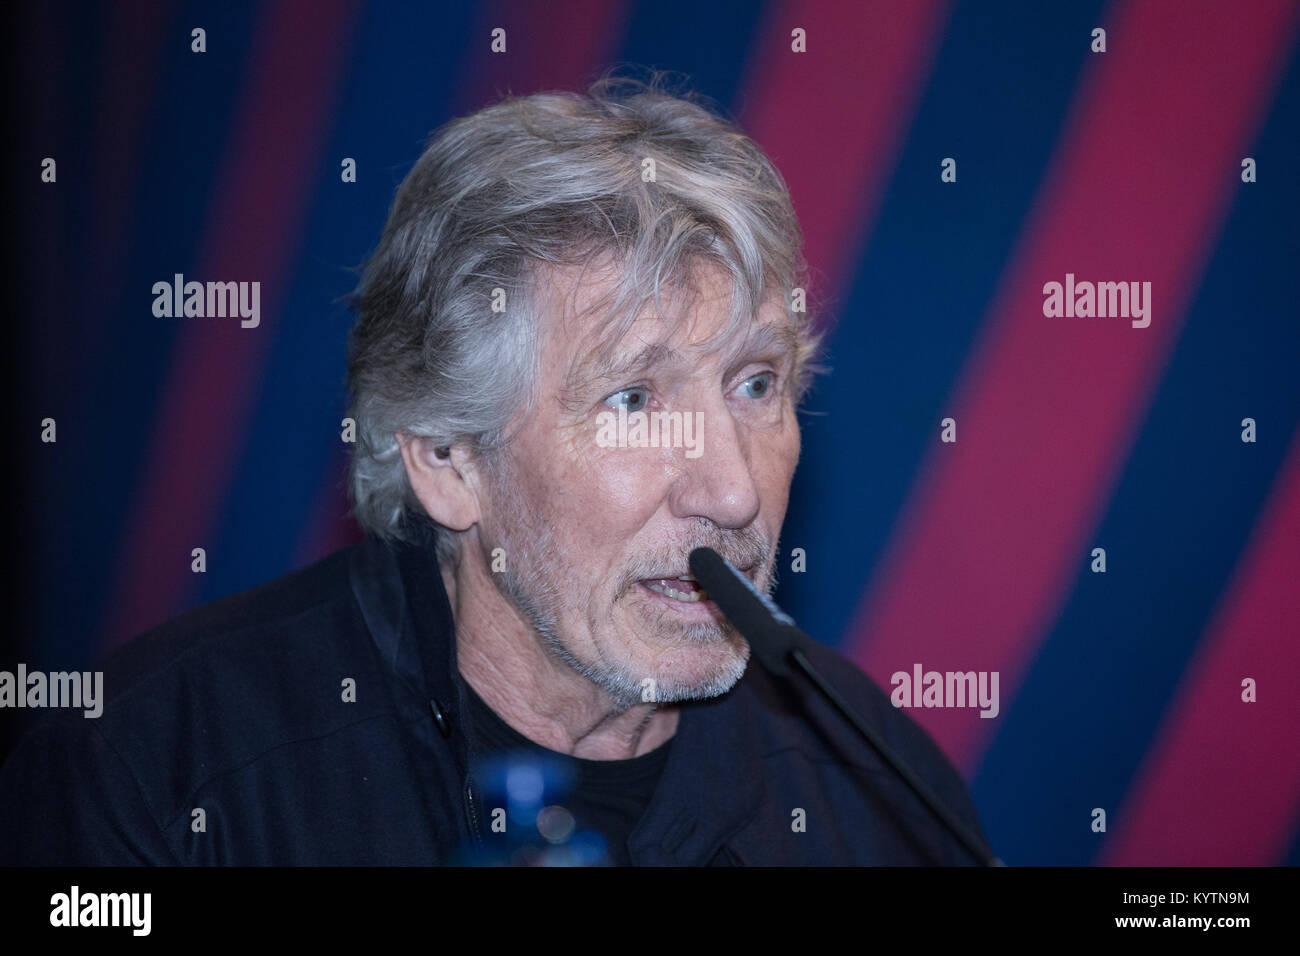 Roma, Italy. 16th Jan, 2018. Roger Waters, English bassist and singer of Pink Floyd Presentation at the Macro in Rome of the exhibition 'The Pink Floyd Exhibition - Their Mortal Remains' Credit: Matteo Nardone/Pacific Press/Alamy Live News Stock Photo